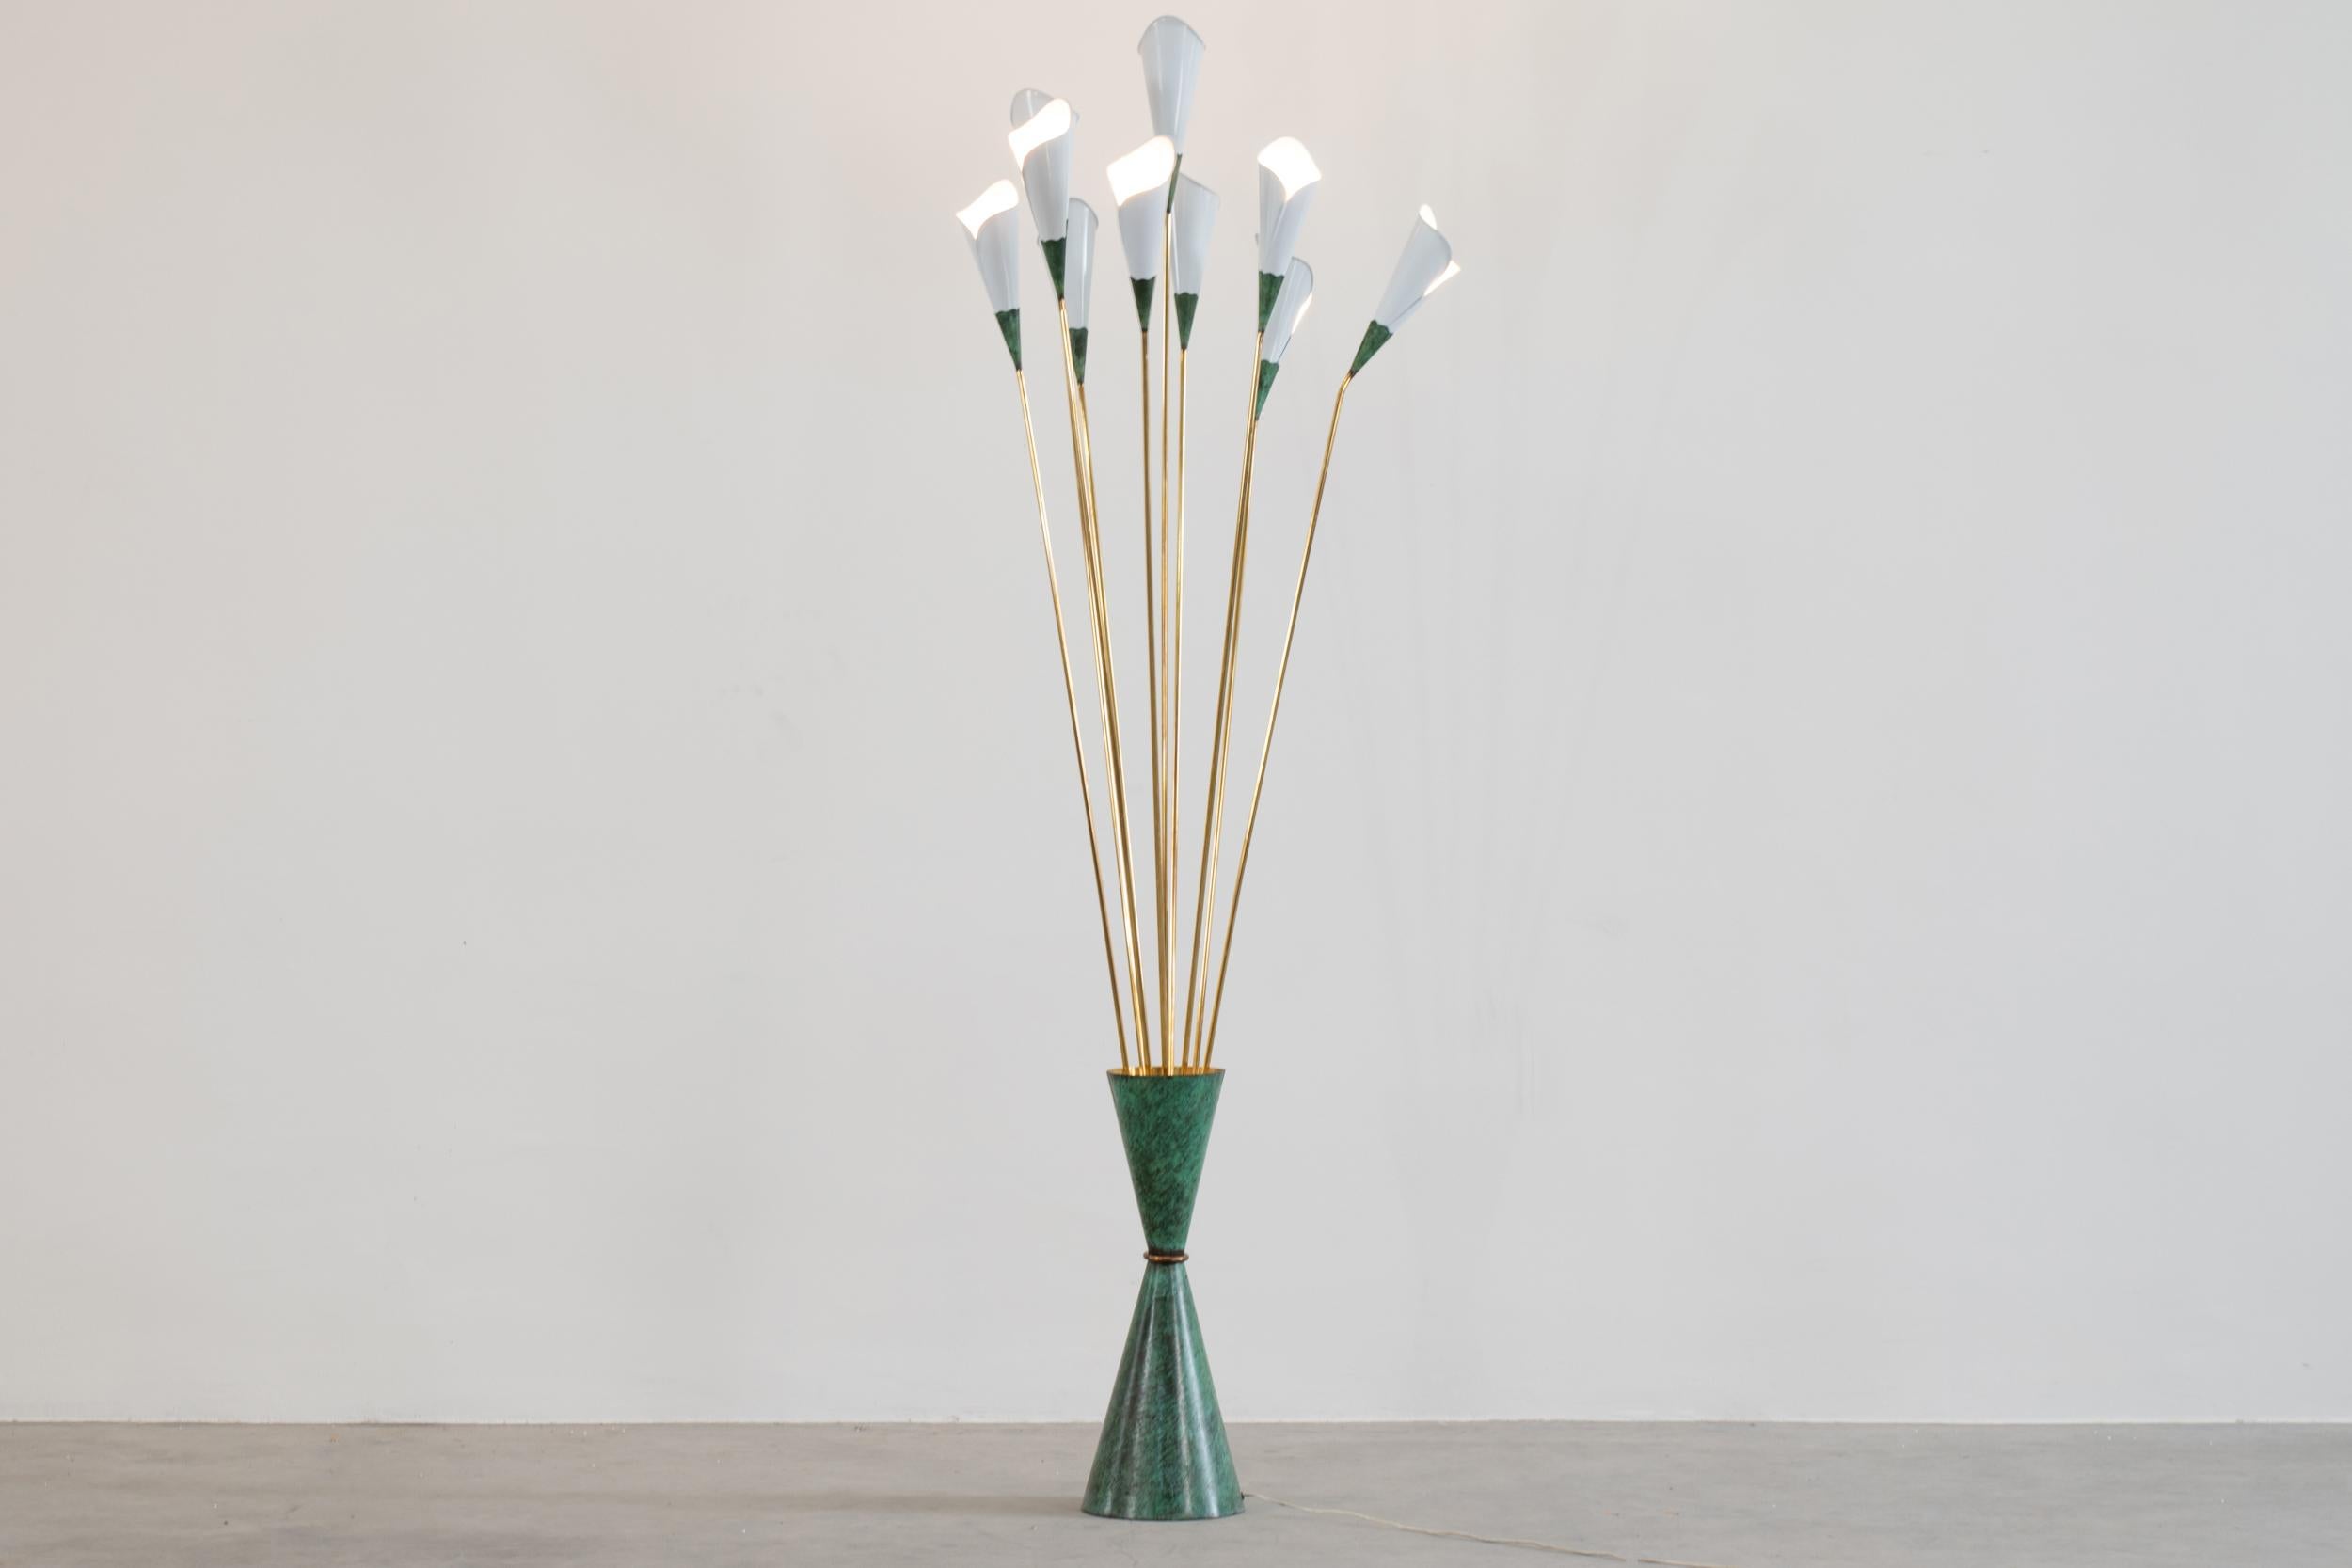 Vintage floor lamp with a base in green painted metal, nine different brass stems with white painted metal diffusers.

This floor lamp evokes a large vessel with some calla flowers, as visible in the particular shape of the diffusers, the